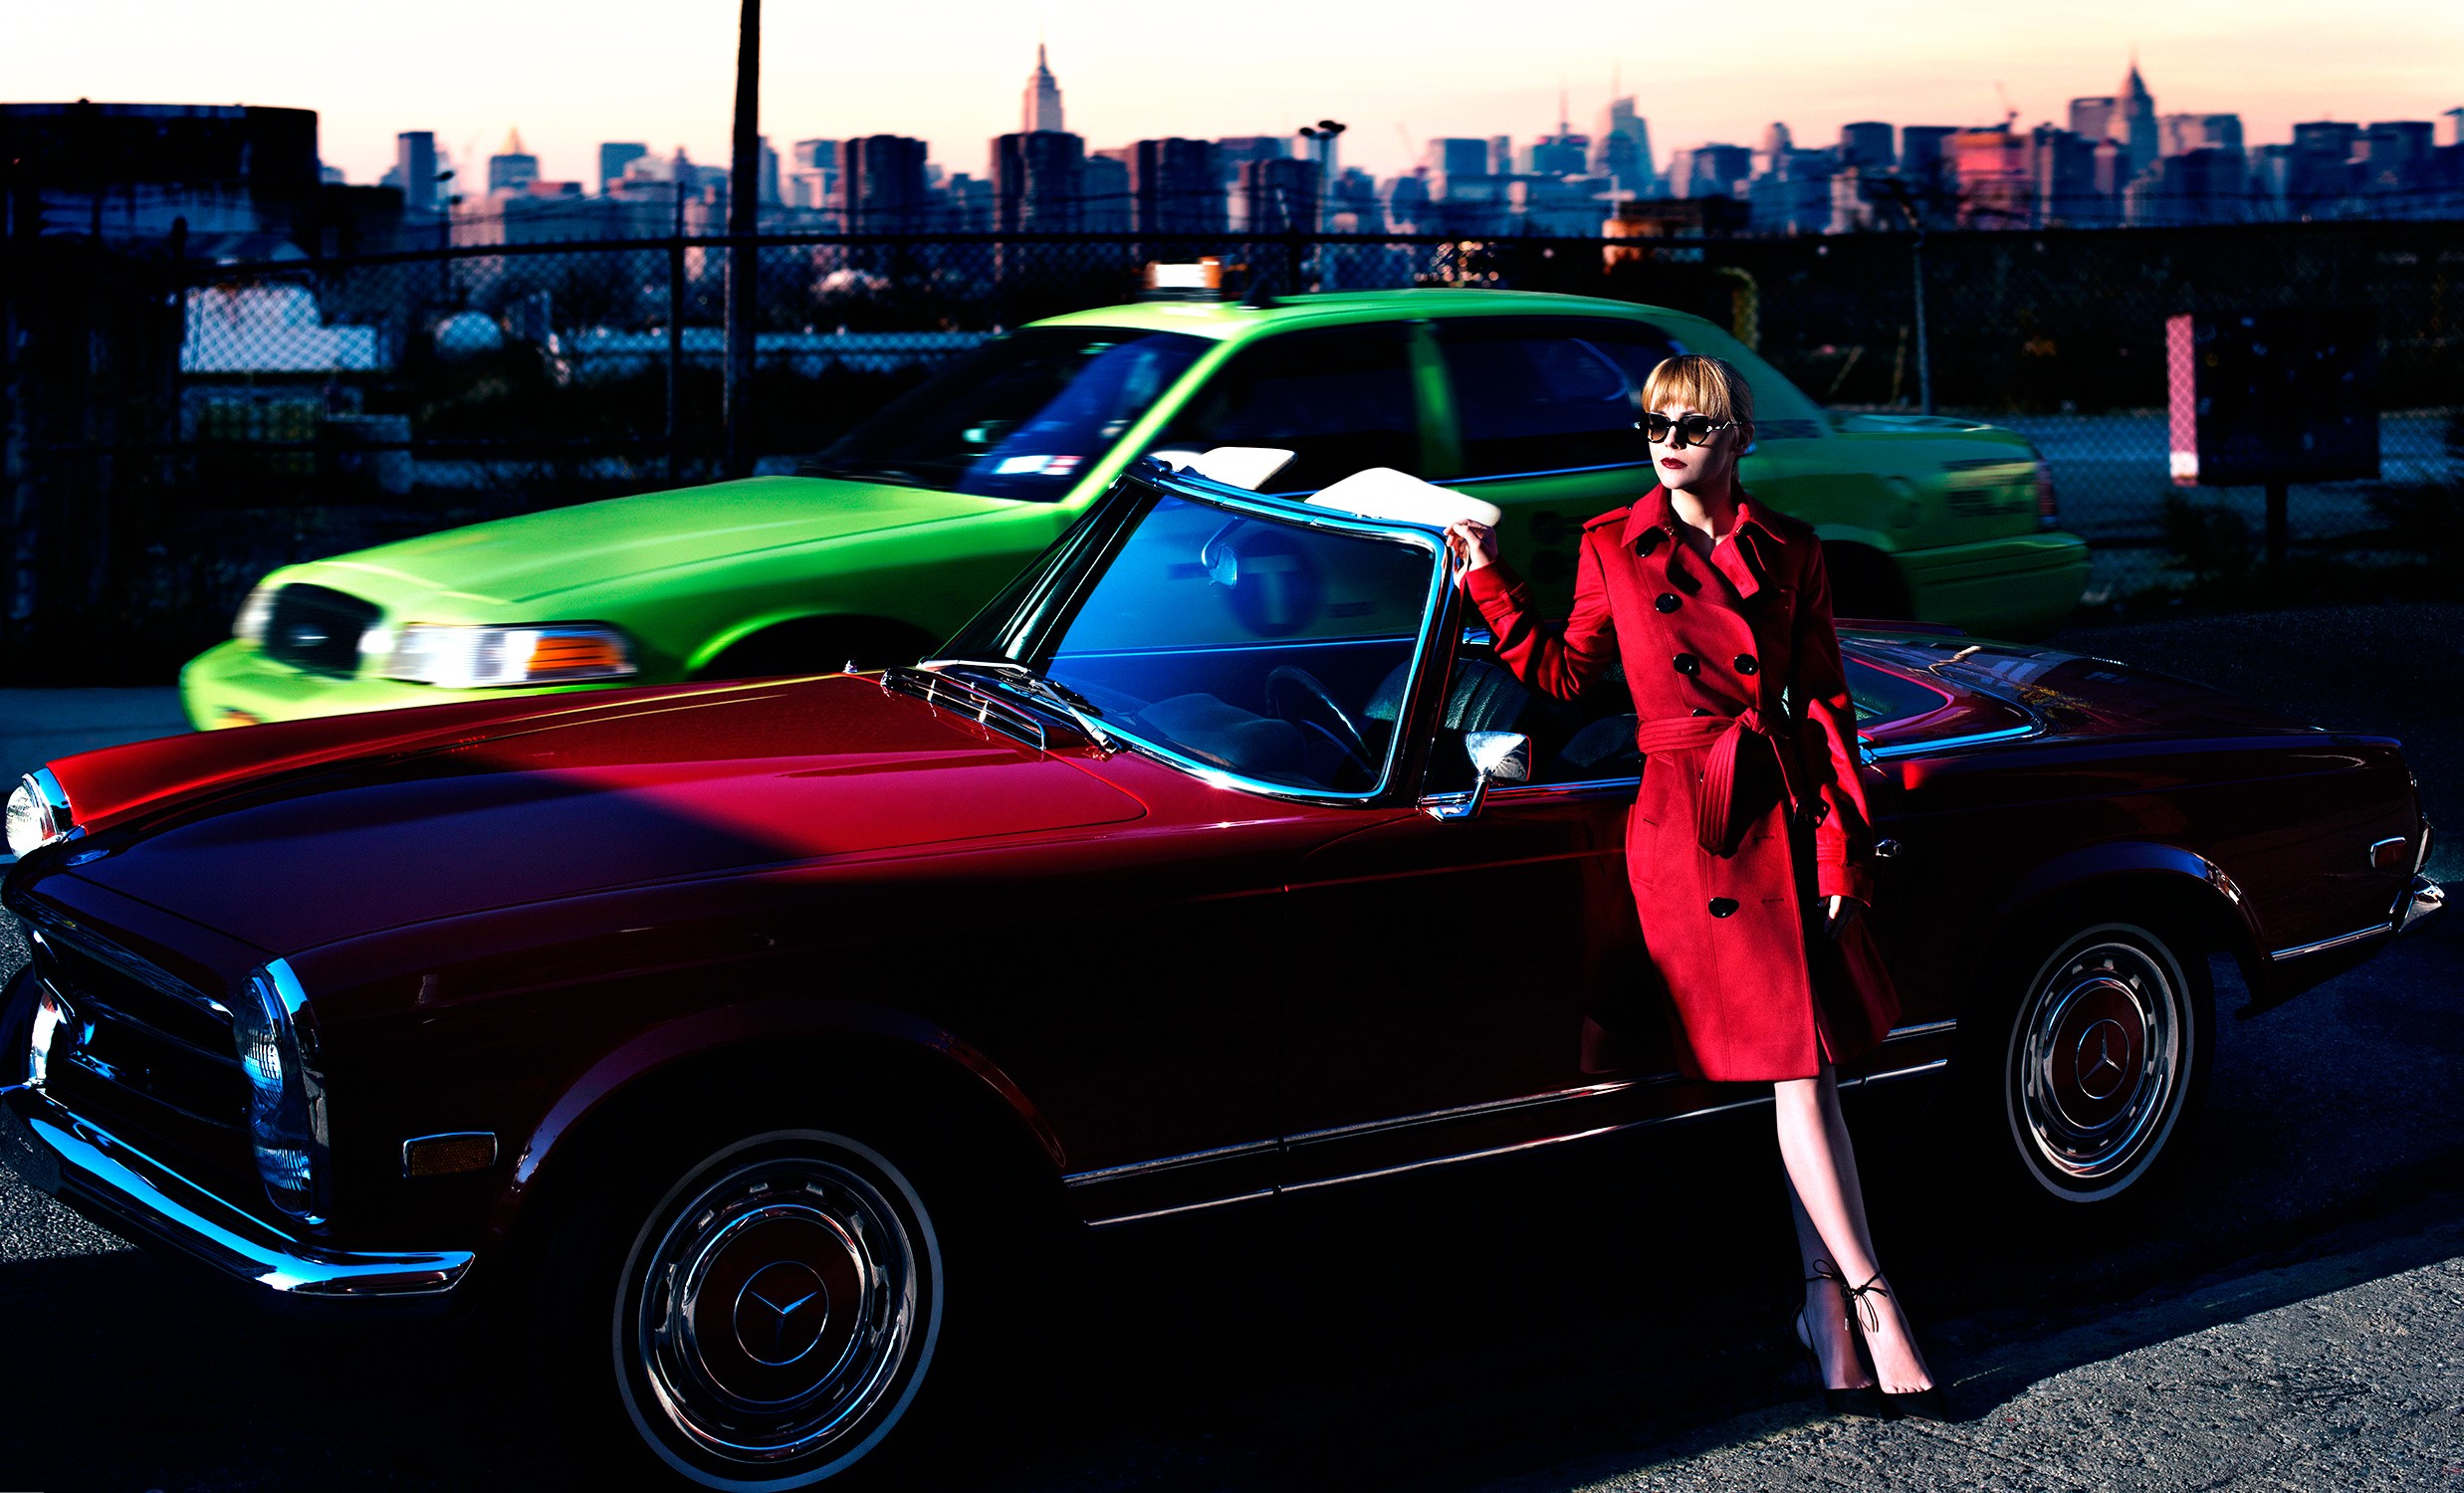 People 2475x1500 women with glasses car vehicle actress Christina Ricci women women with shades leaning